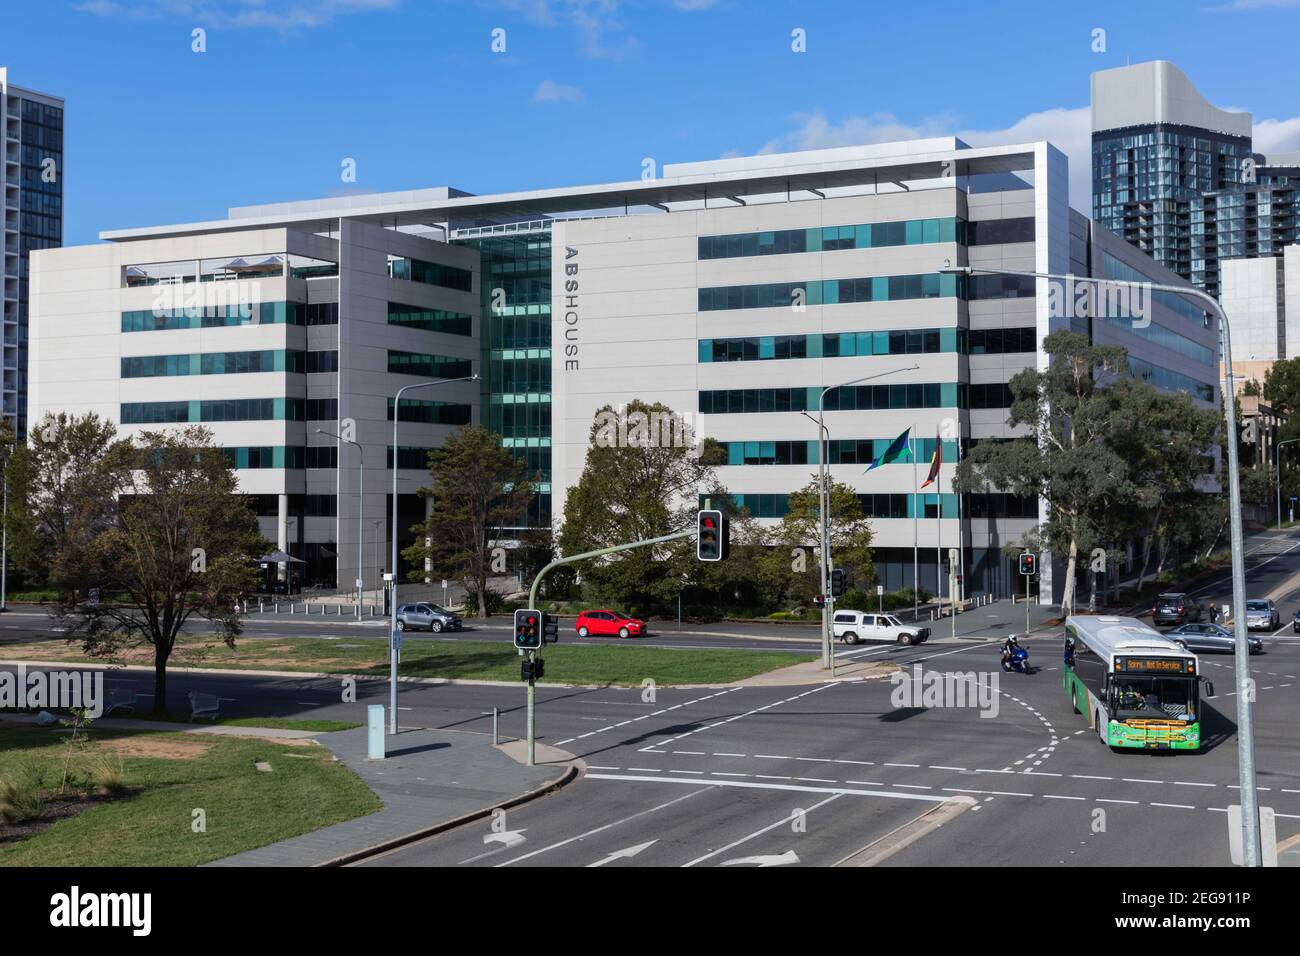 Canberra. 18th Feb, 2021. Photo taken on Feb. 18, 2021 shows the Australian Bureau of Statistics (ABS) building in Canberra, Australia. Australia's unemployment rate has fallen for the third consecutive month